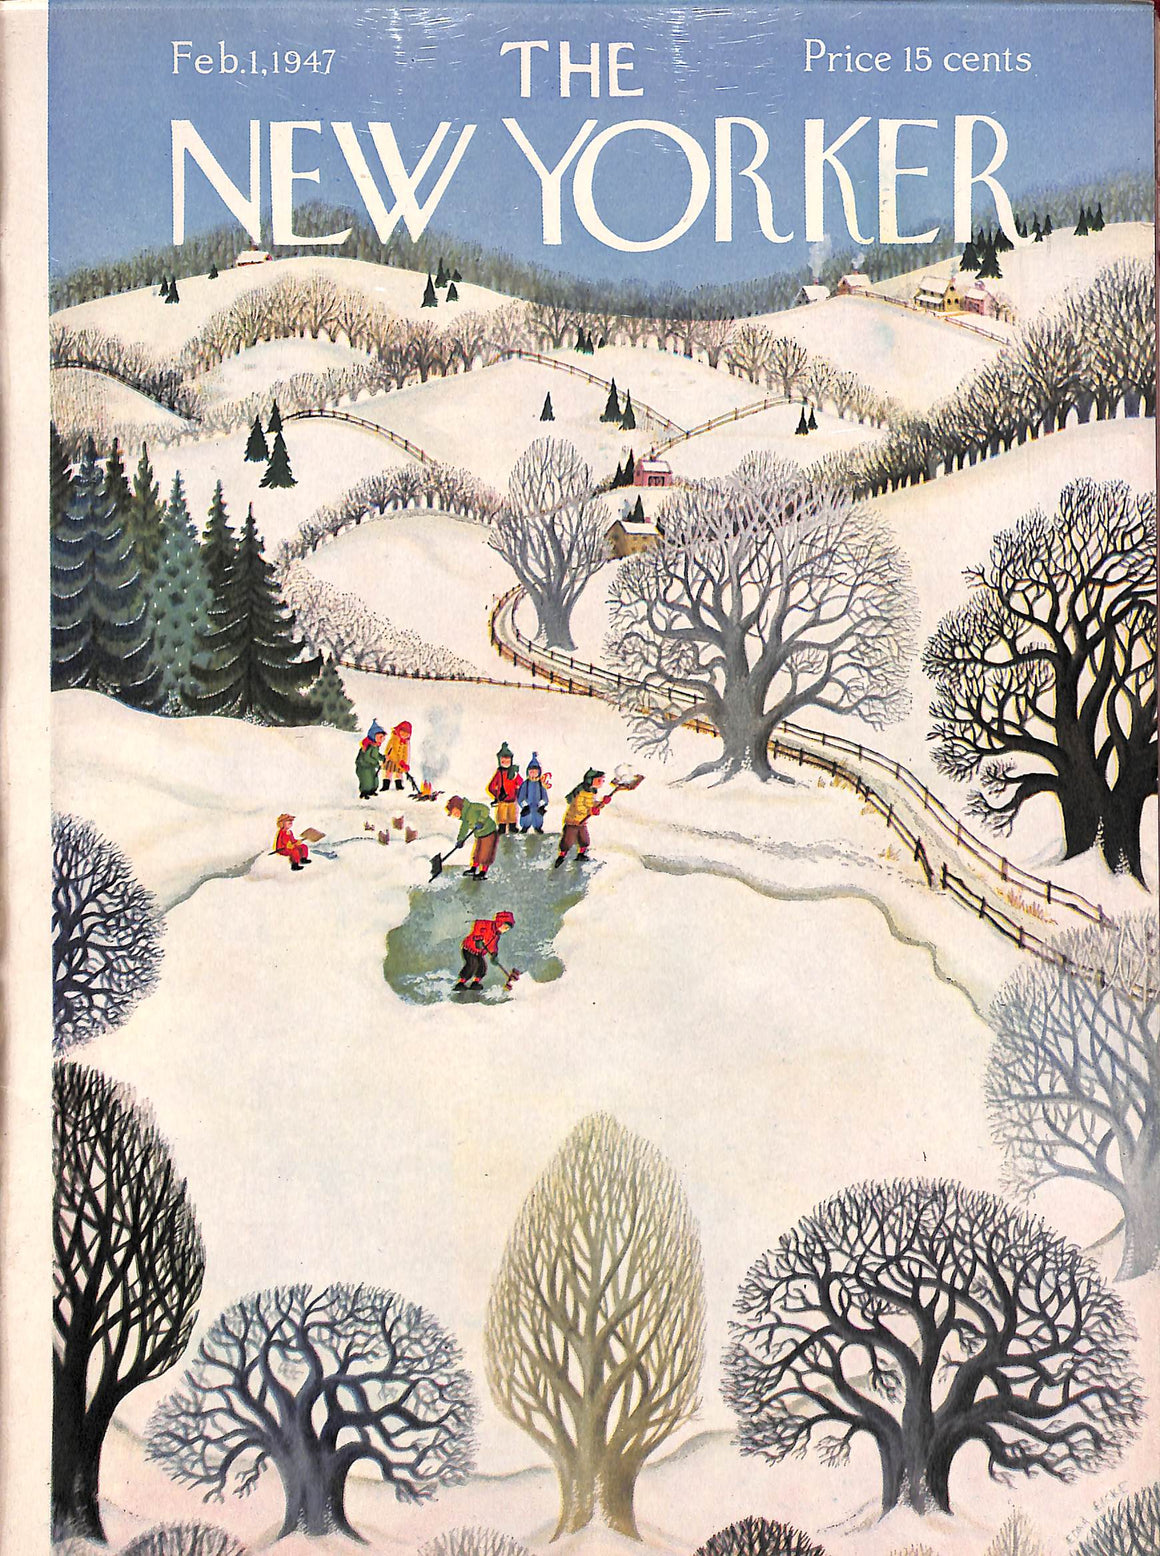 The New Yorker Feb. 1, 1947